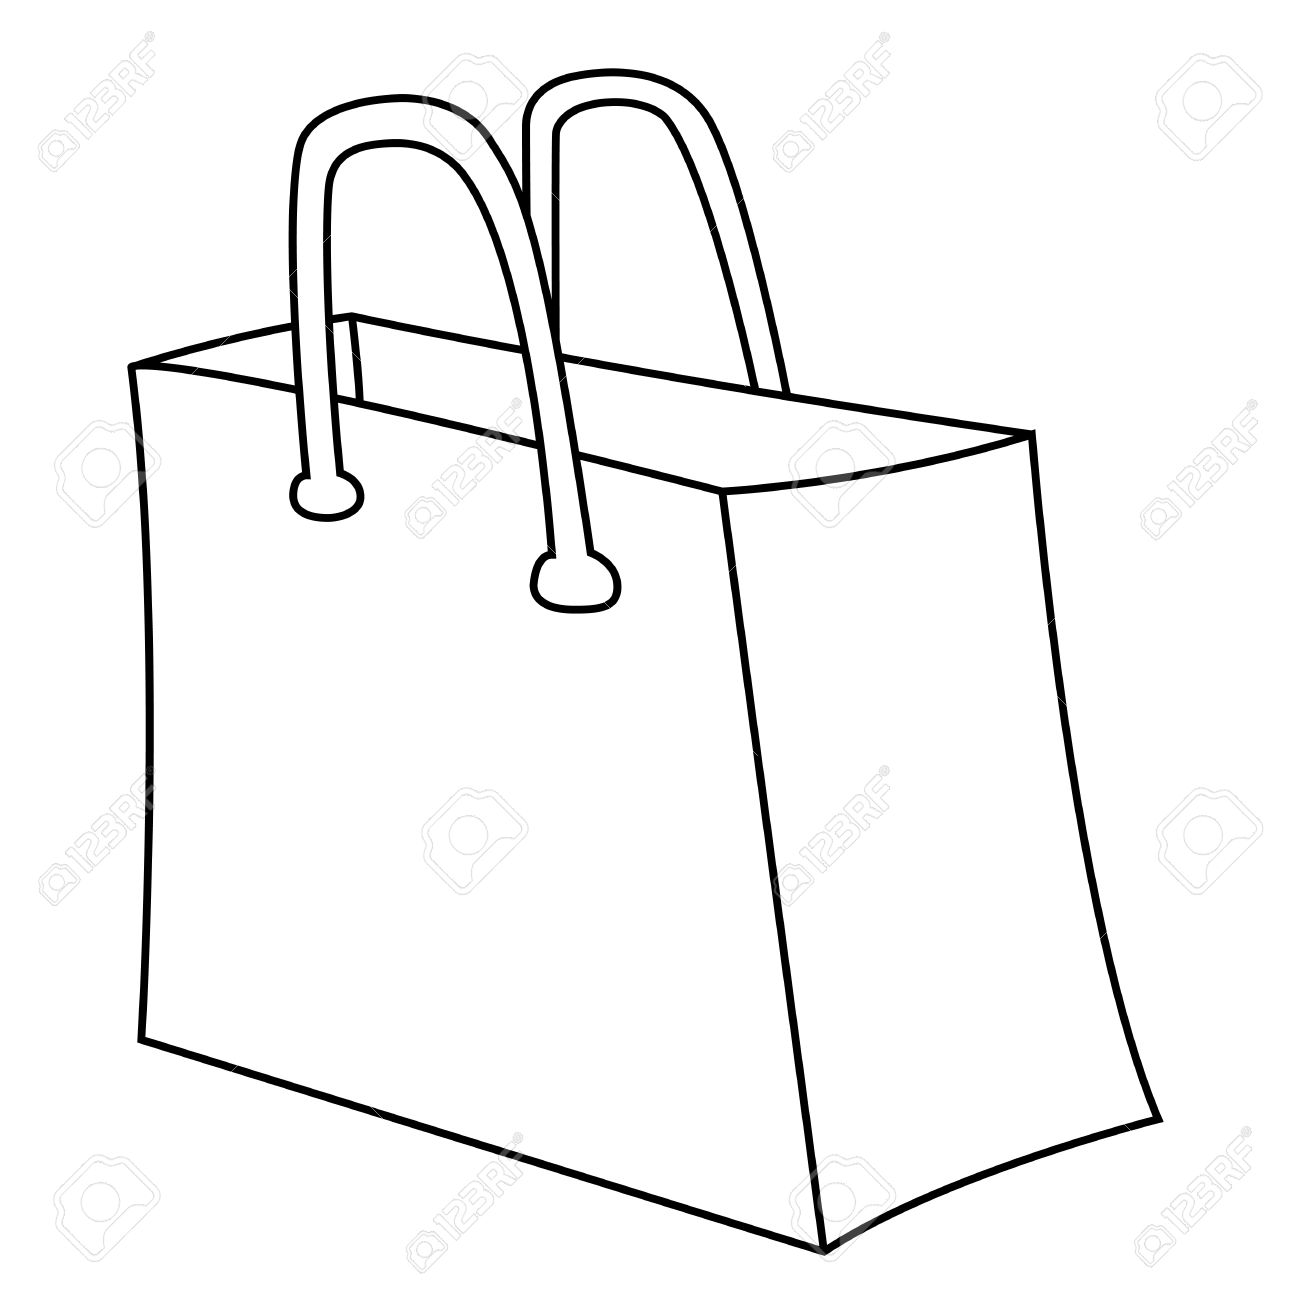 Paper Bag Clipart Black And White | IUCN Water